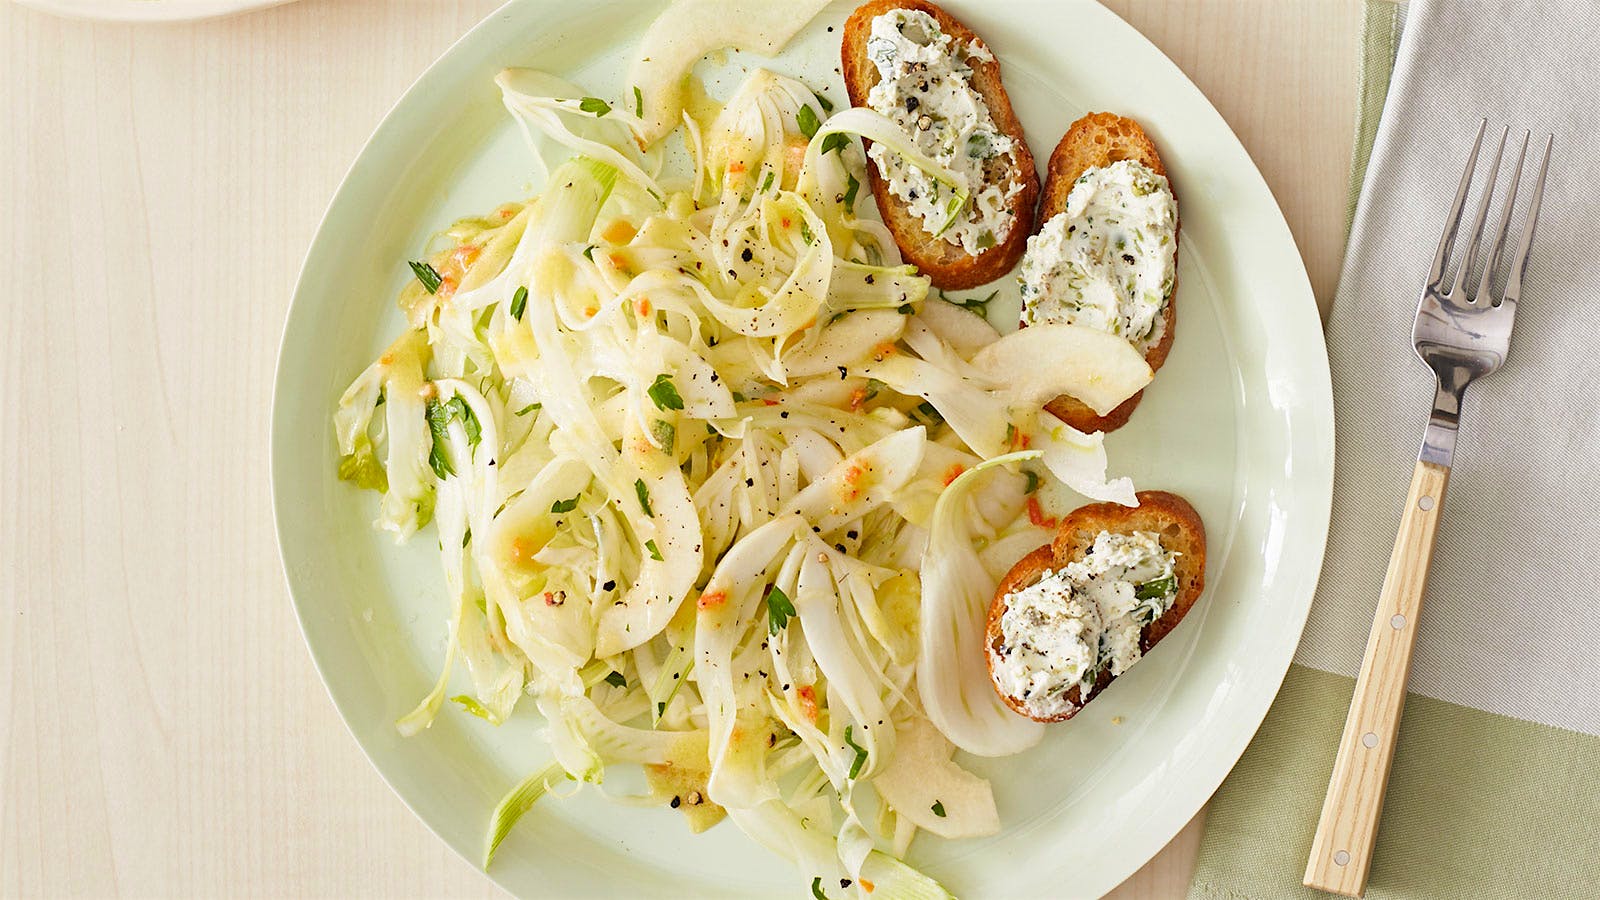 Fennel and Pear Salad with Tarragon Vinaigrette